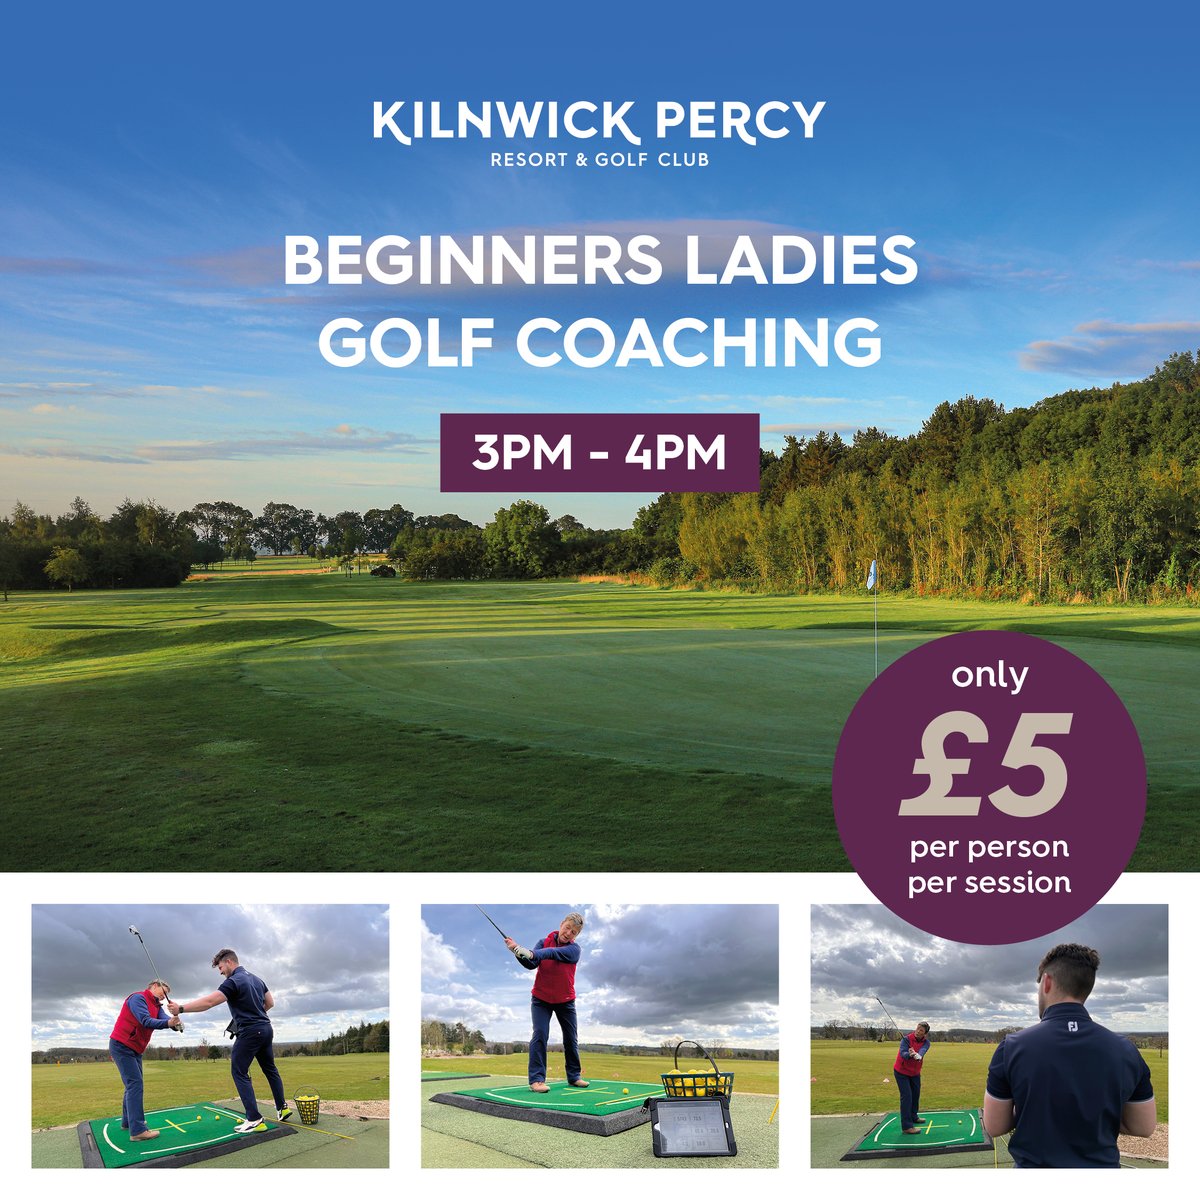 Beginners Ladies Golf Coaching. £5 per session 3-00pm - 4-00pm Sat 27th April, Sat 4th May, Sat 18th May & Sat 25th May To book please call 01759 303090 opt 3 or call into the golf shop